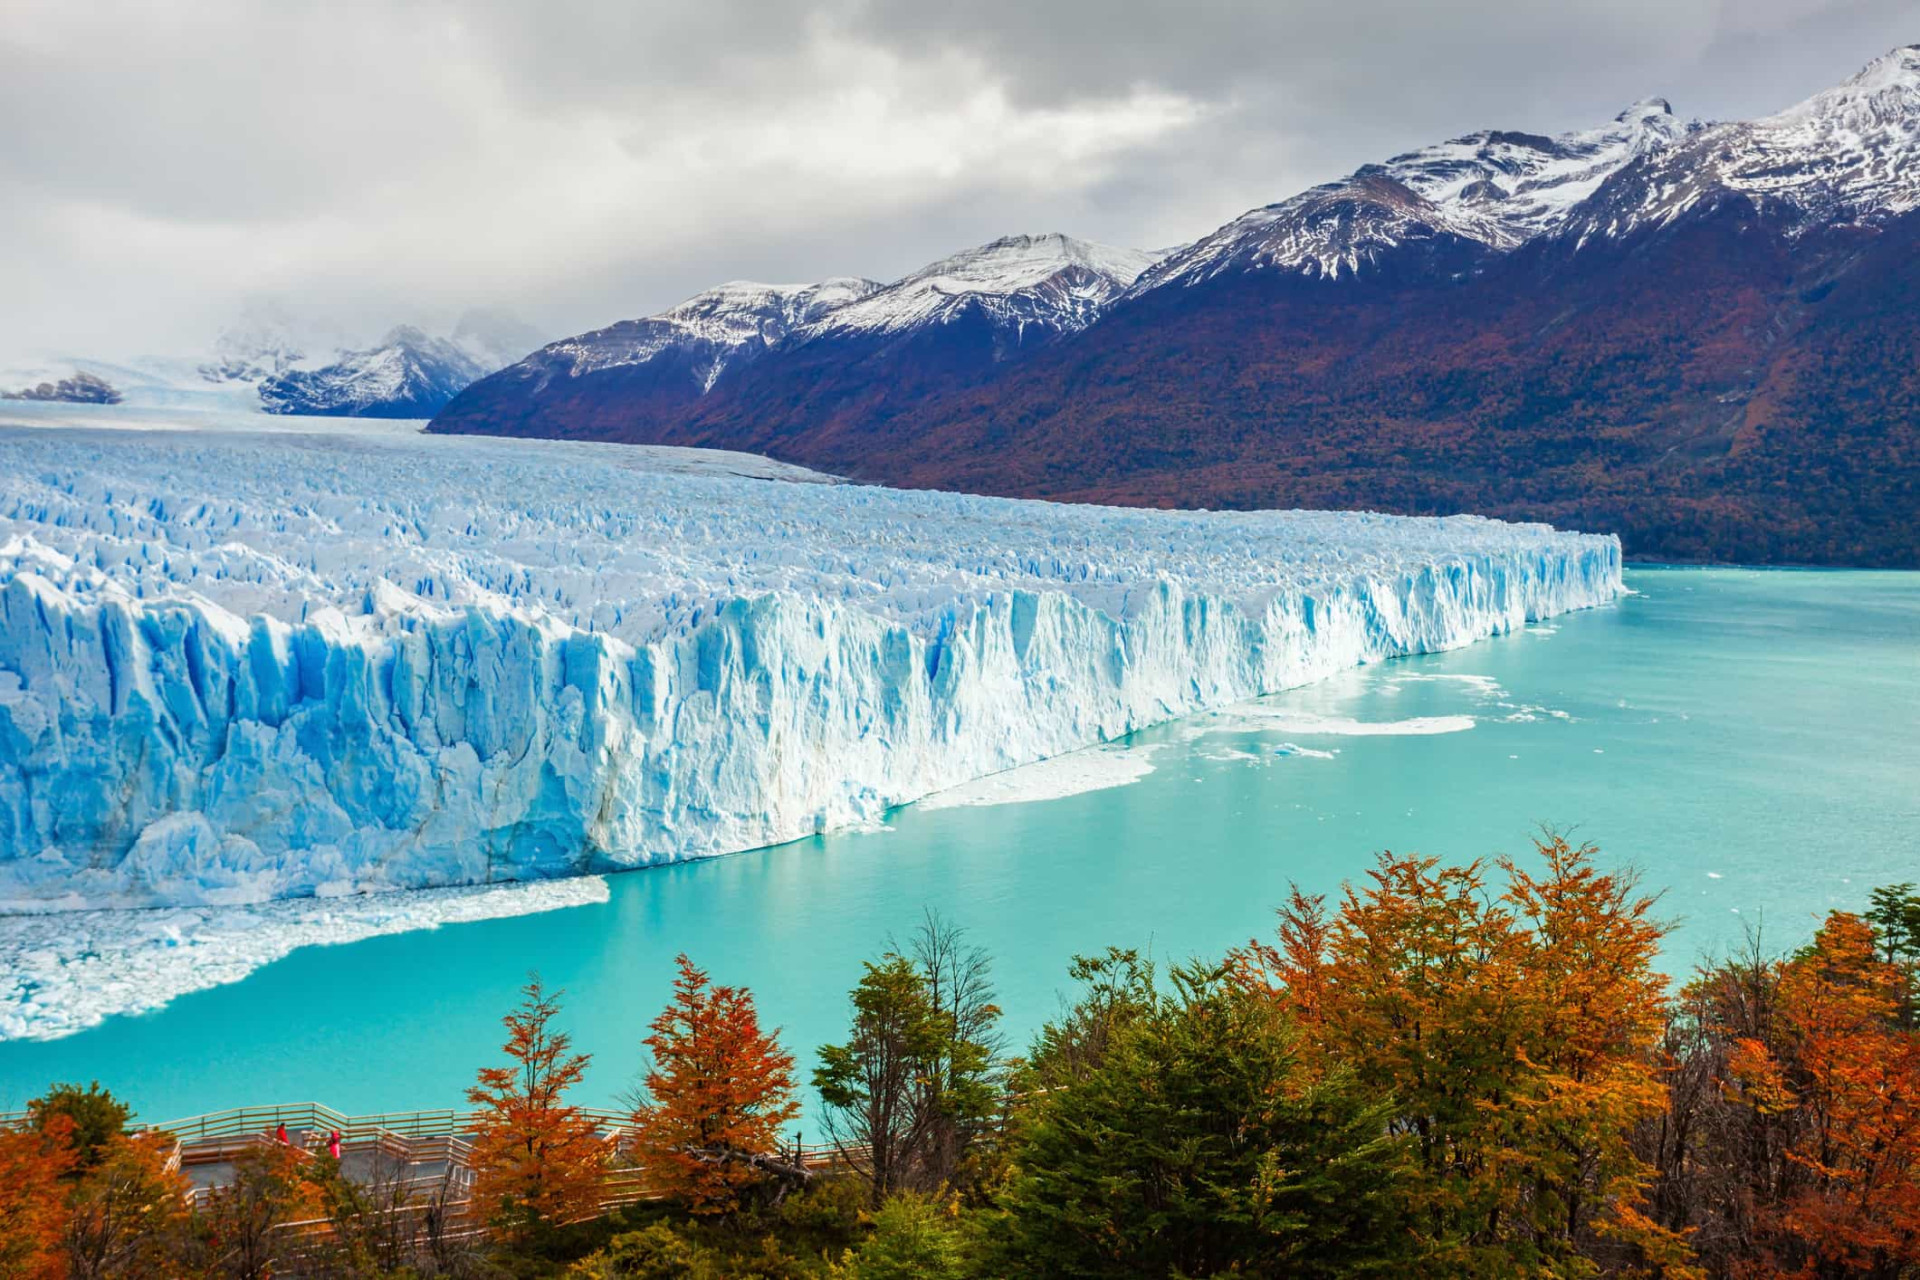 The frigid splendor that is Los Glaciares National Park is simply breathtaking. Named after the Andes' ice cap—the largest outside of Antarctica, Greenland and Iceland—the park is a designated UNESCO World Heritage Site.